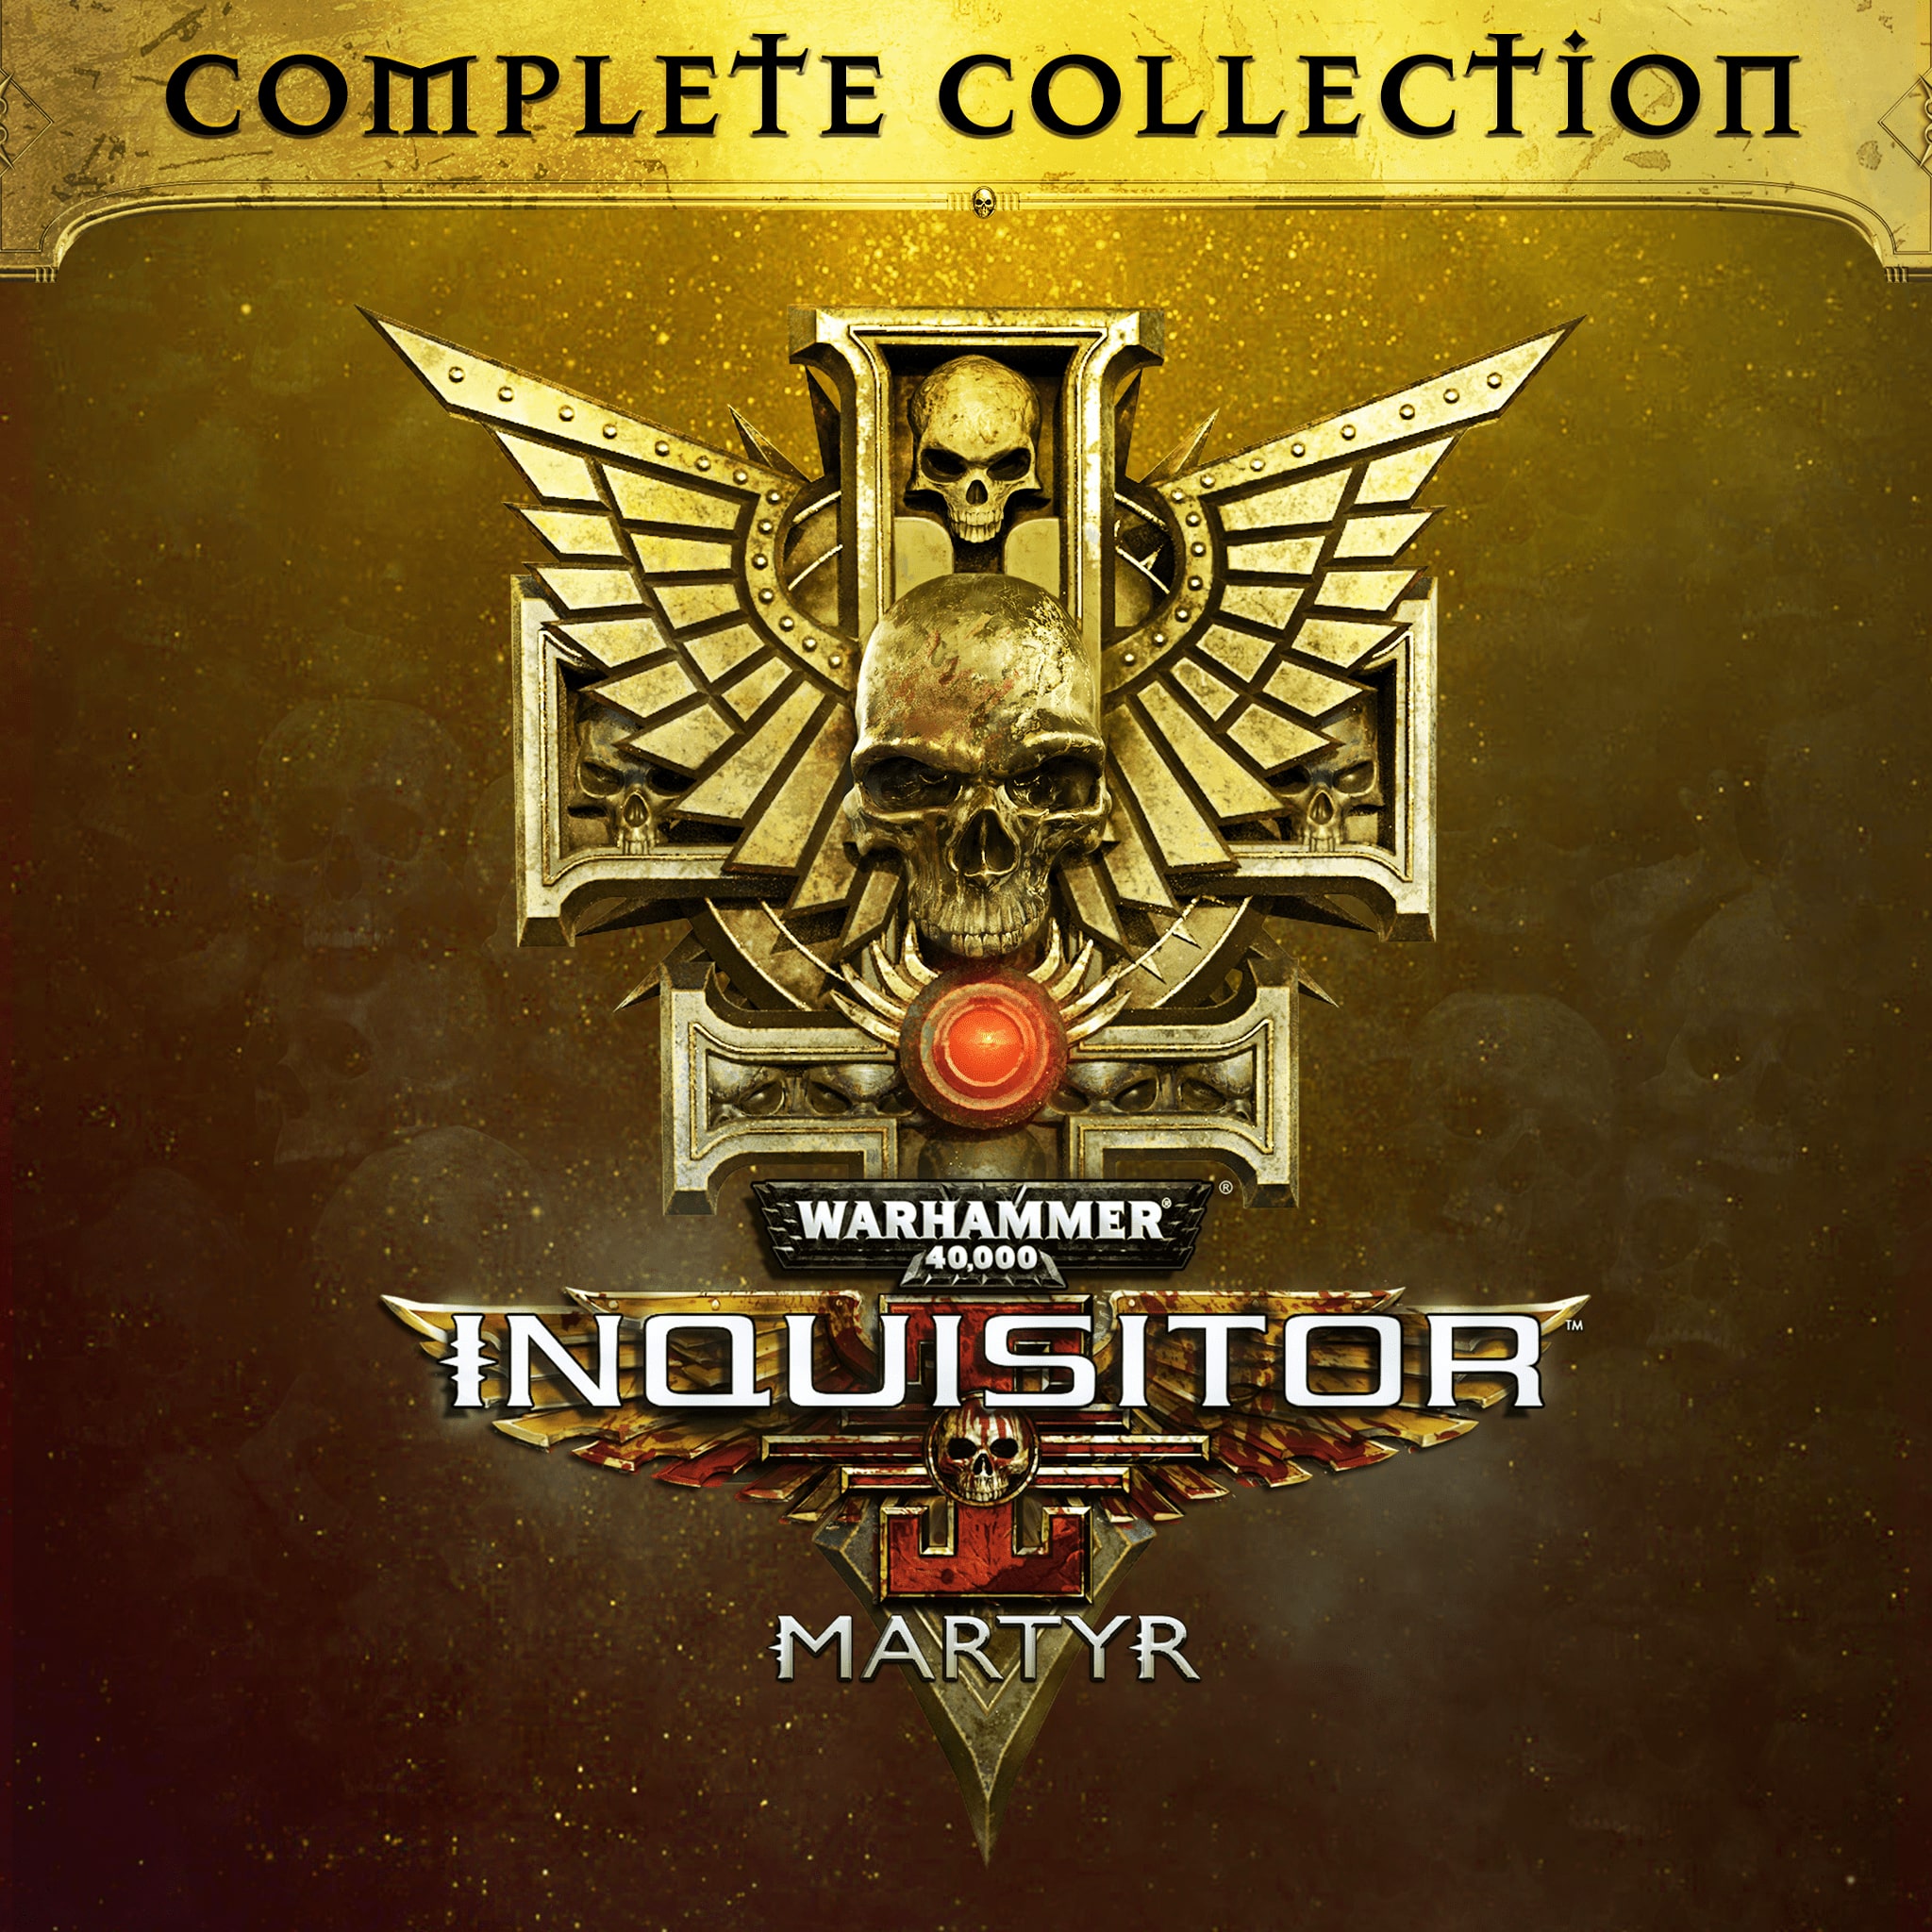 Warhammer 40,000: Inquisitor - Martyr Complete Collection cover